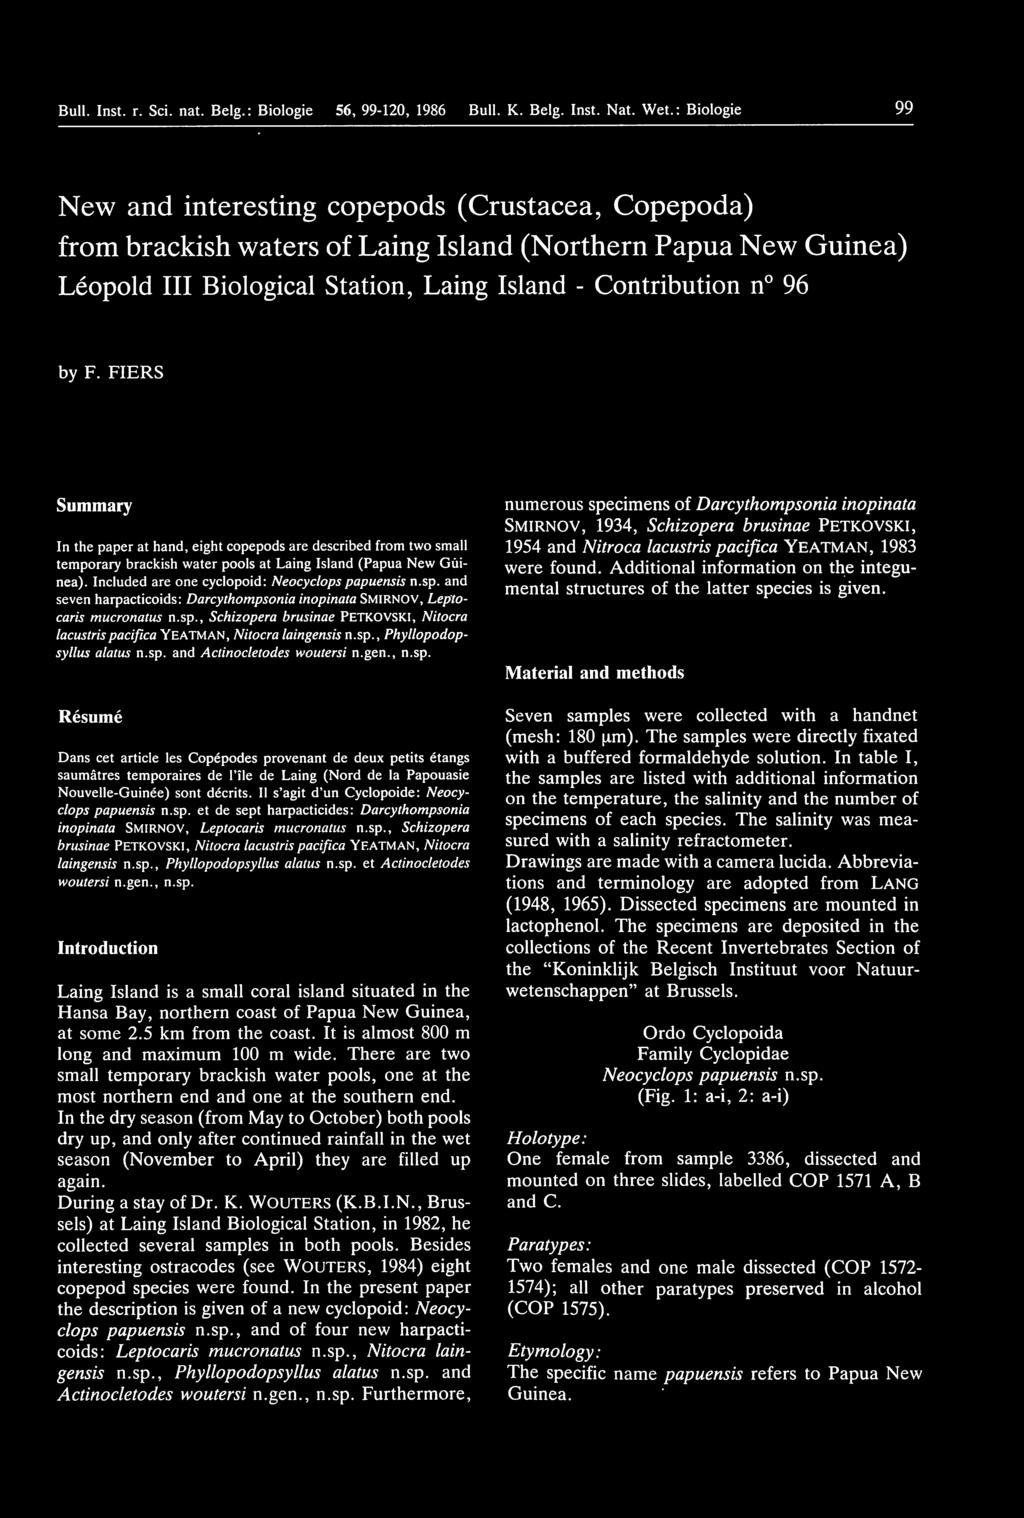 F. FIERS Summary In the paper at ha nd, eight copepods are described from two small temporary brackish water pools at Laing Island (Papua New Guinea).